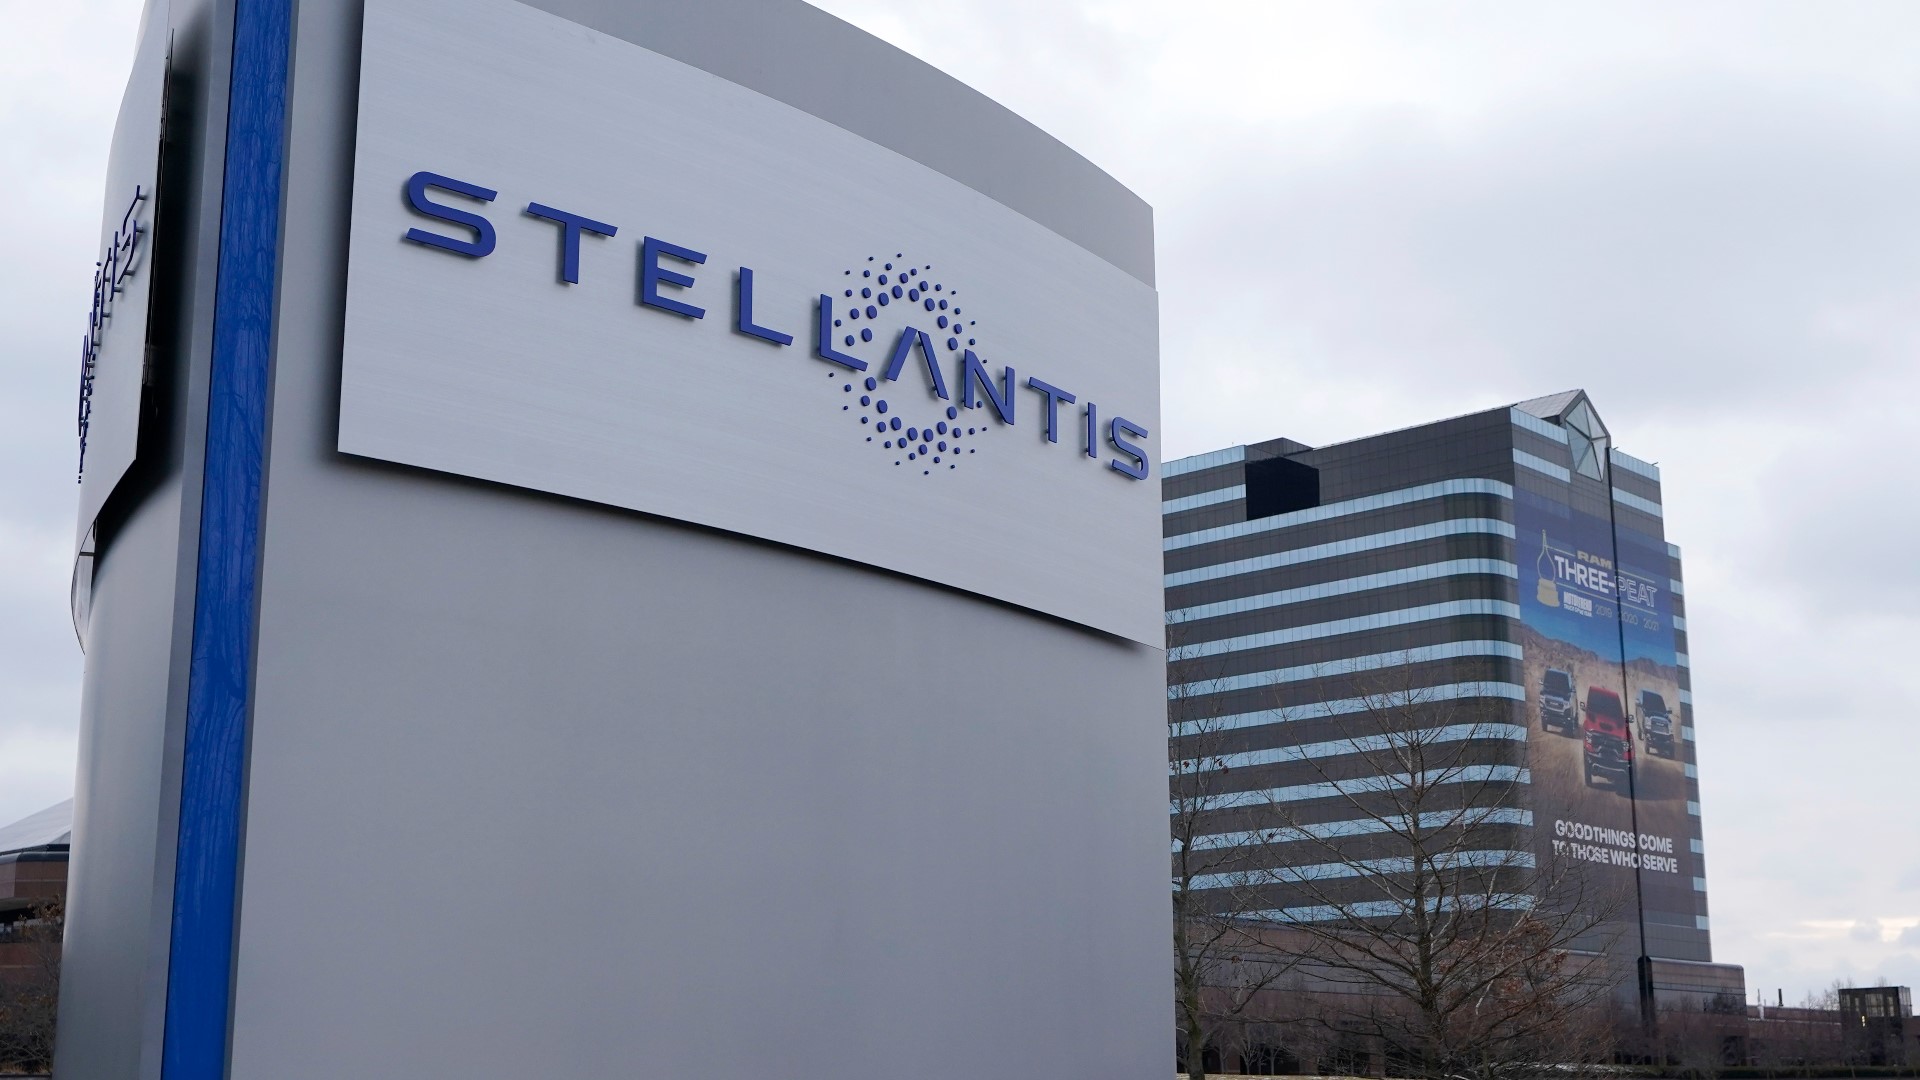 The cuts, effective March 31, amount to about 2% of Stellantis' global workforce in engineering, technology and software, the automaker said in a prepared statement.